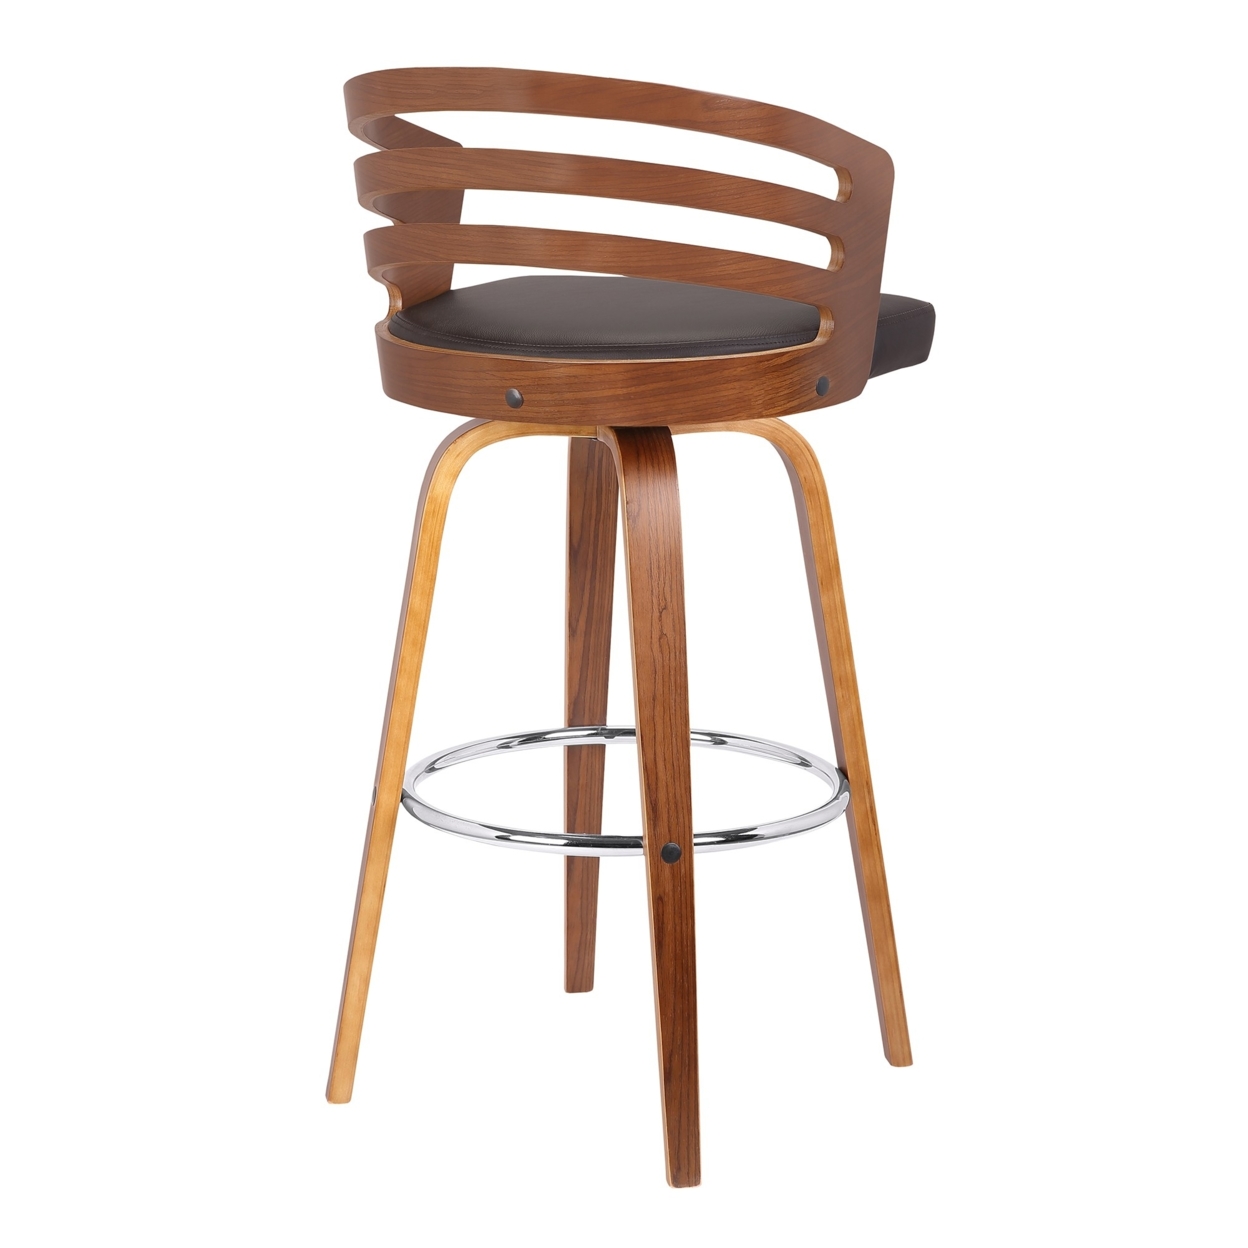 Leatherette Swivel Wooden Barstool With Curved Back, Brown- Saltoro Sherpi